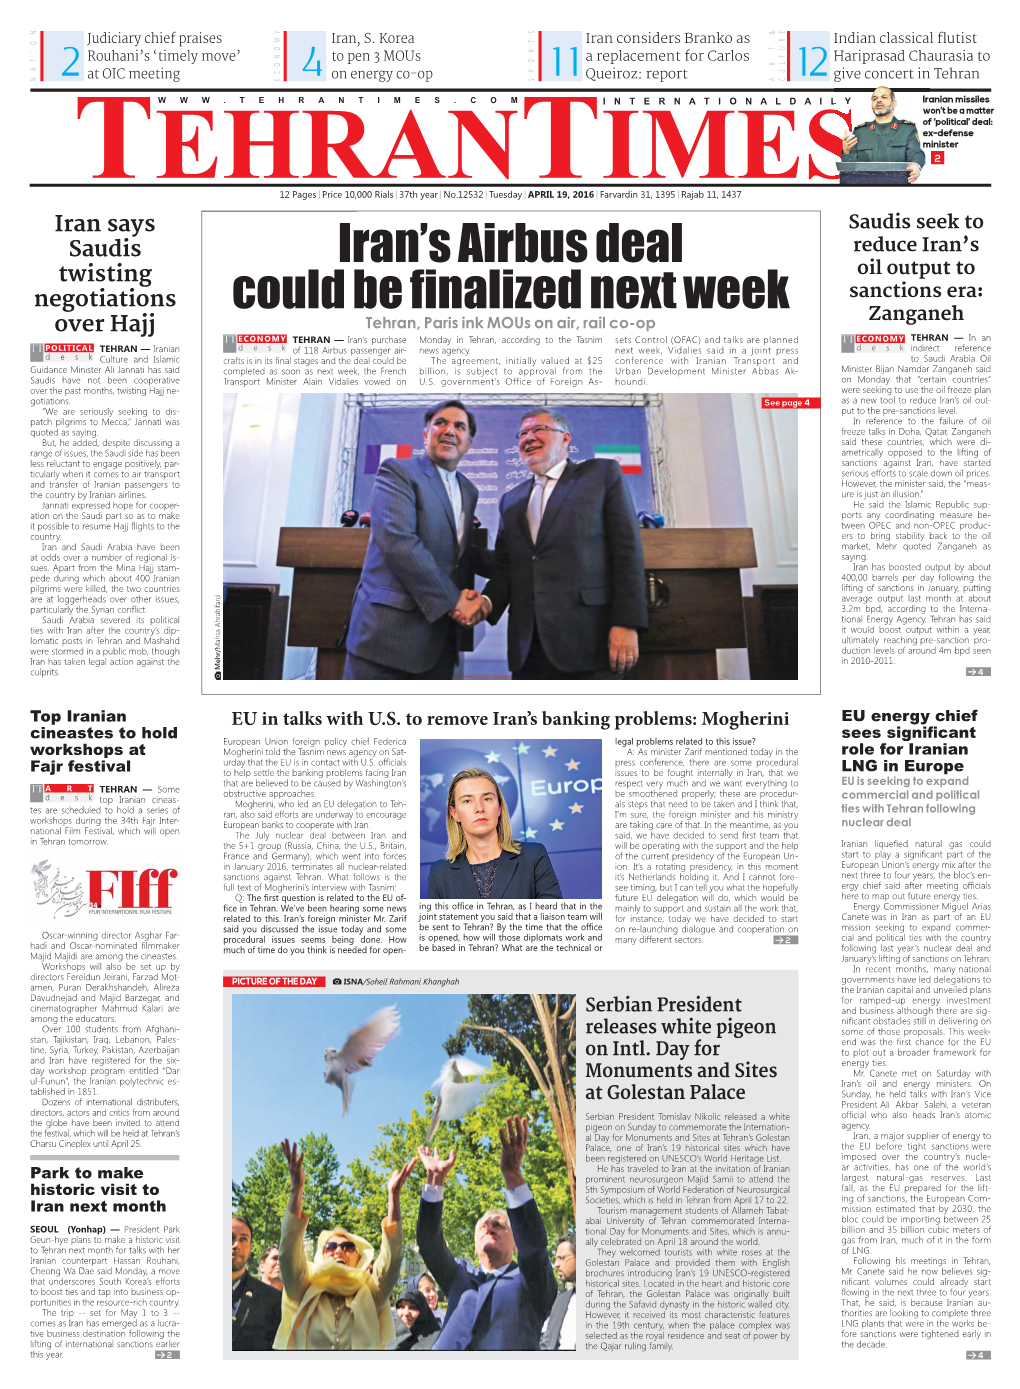 Iran's Airbus Deal Could Be Finalized Next Week